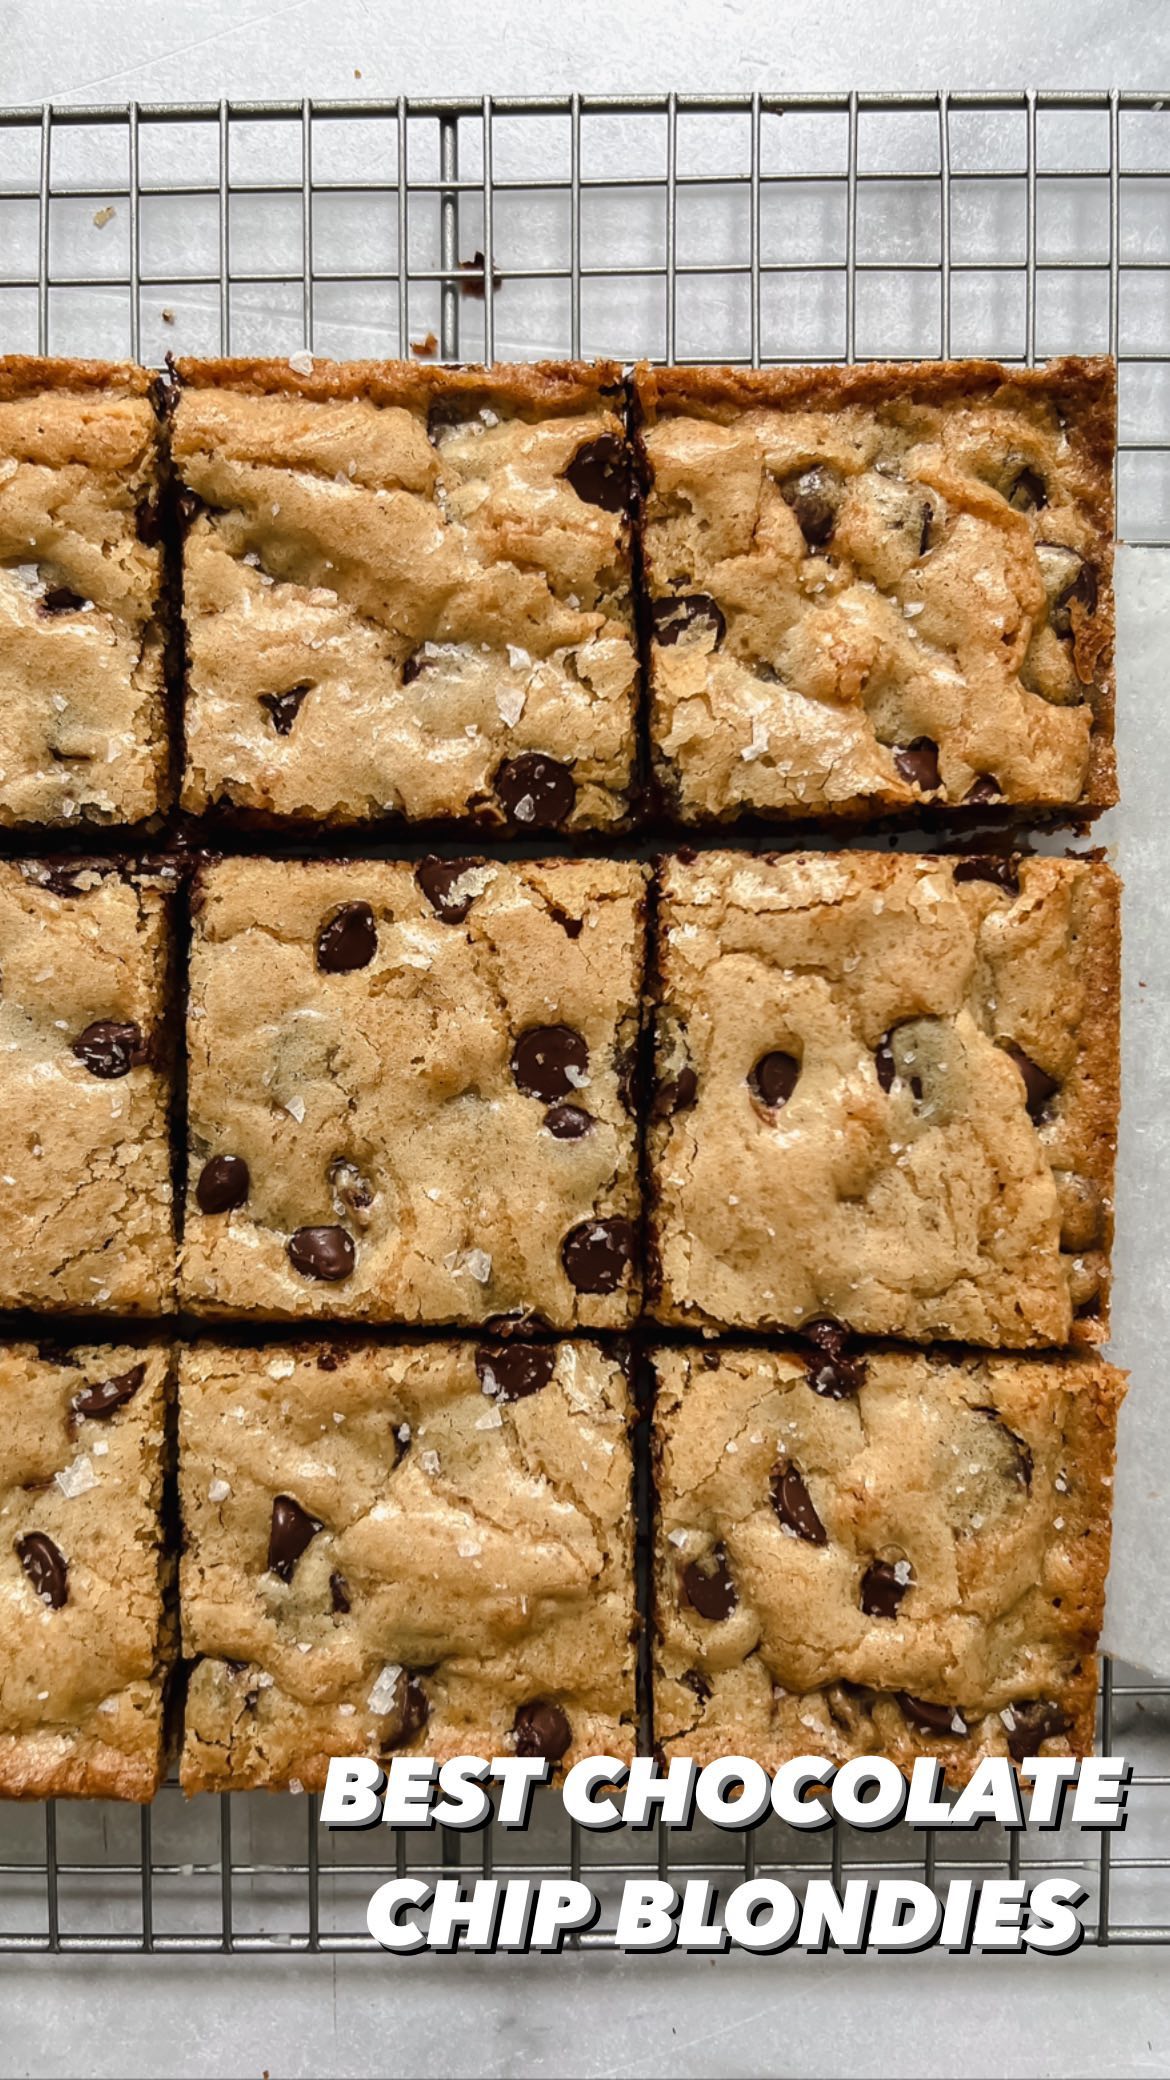 BEST CHOCOLATE CHIP BLONDIES🍫 aka little squares of pure bliss✨
.
they’re made in one bowl, chewy, doughy, & perfect to make with kids! also no wait time, because you melt the butter & you don’t have to chill the dough so you could make them right NOW😎
.
what you need to make them:
-unsalted butter
-brown sugar (light or dark)
-egg & egg yolk
-vanilla extract
-all-purpose flour
-baking powder
-sea salt
-chocolate chips
.
the full recipe is on our blog & linked in our bio/ stories! enjoy🥰
.
https://daddioskitchen.com/2022/08/10/chocolate-chip-blondies/